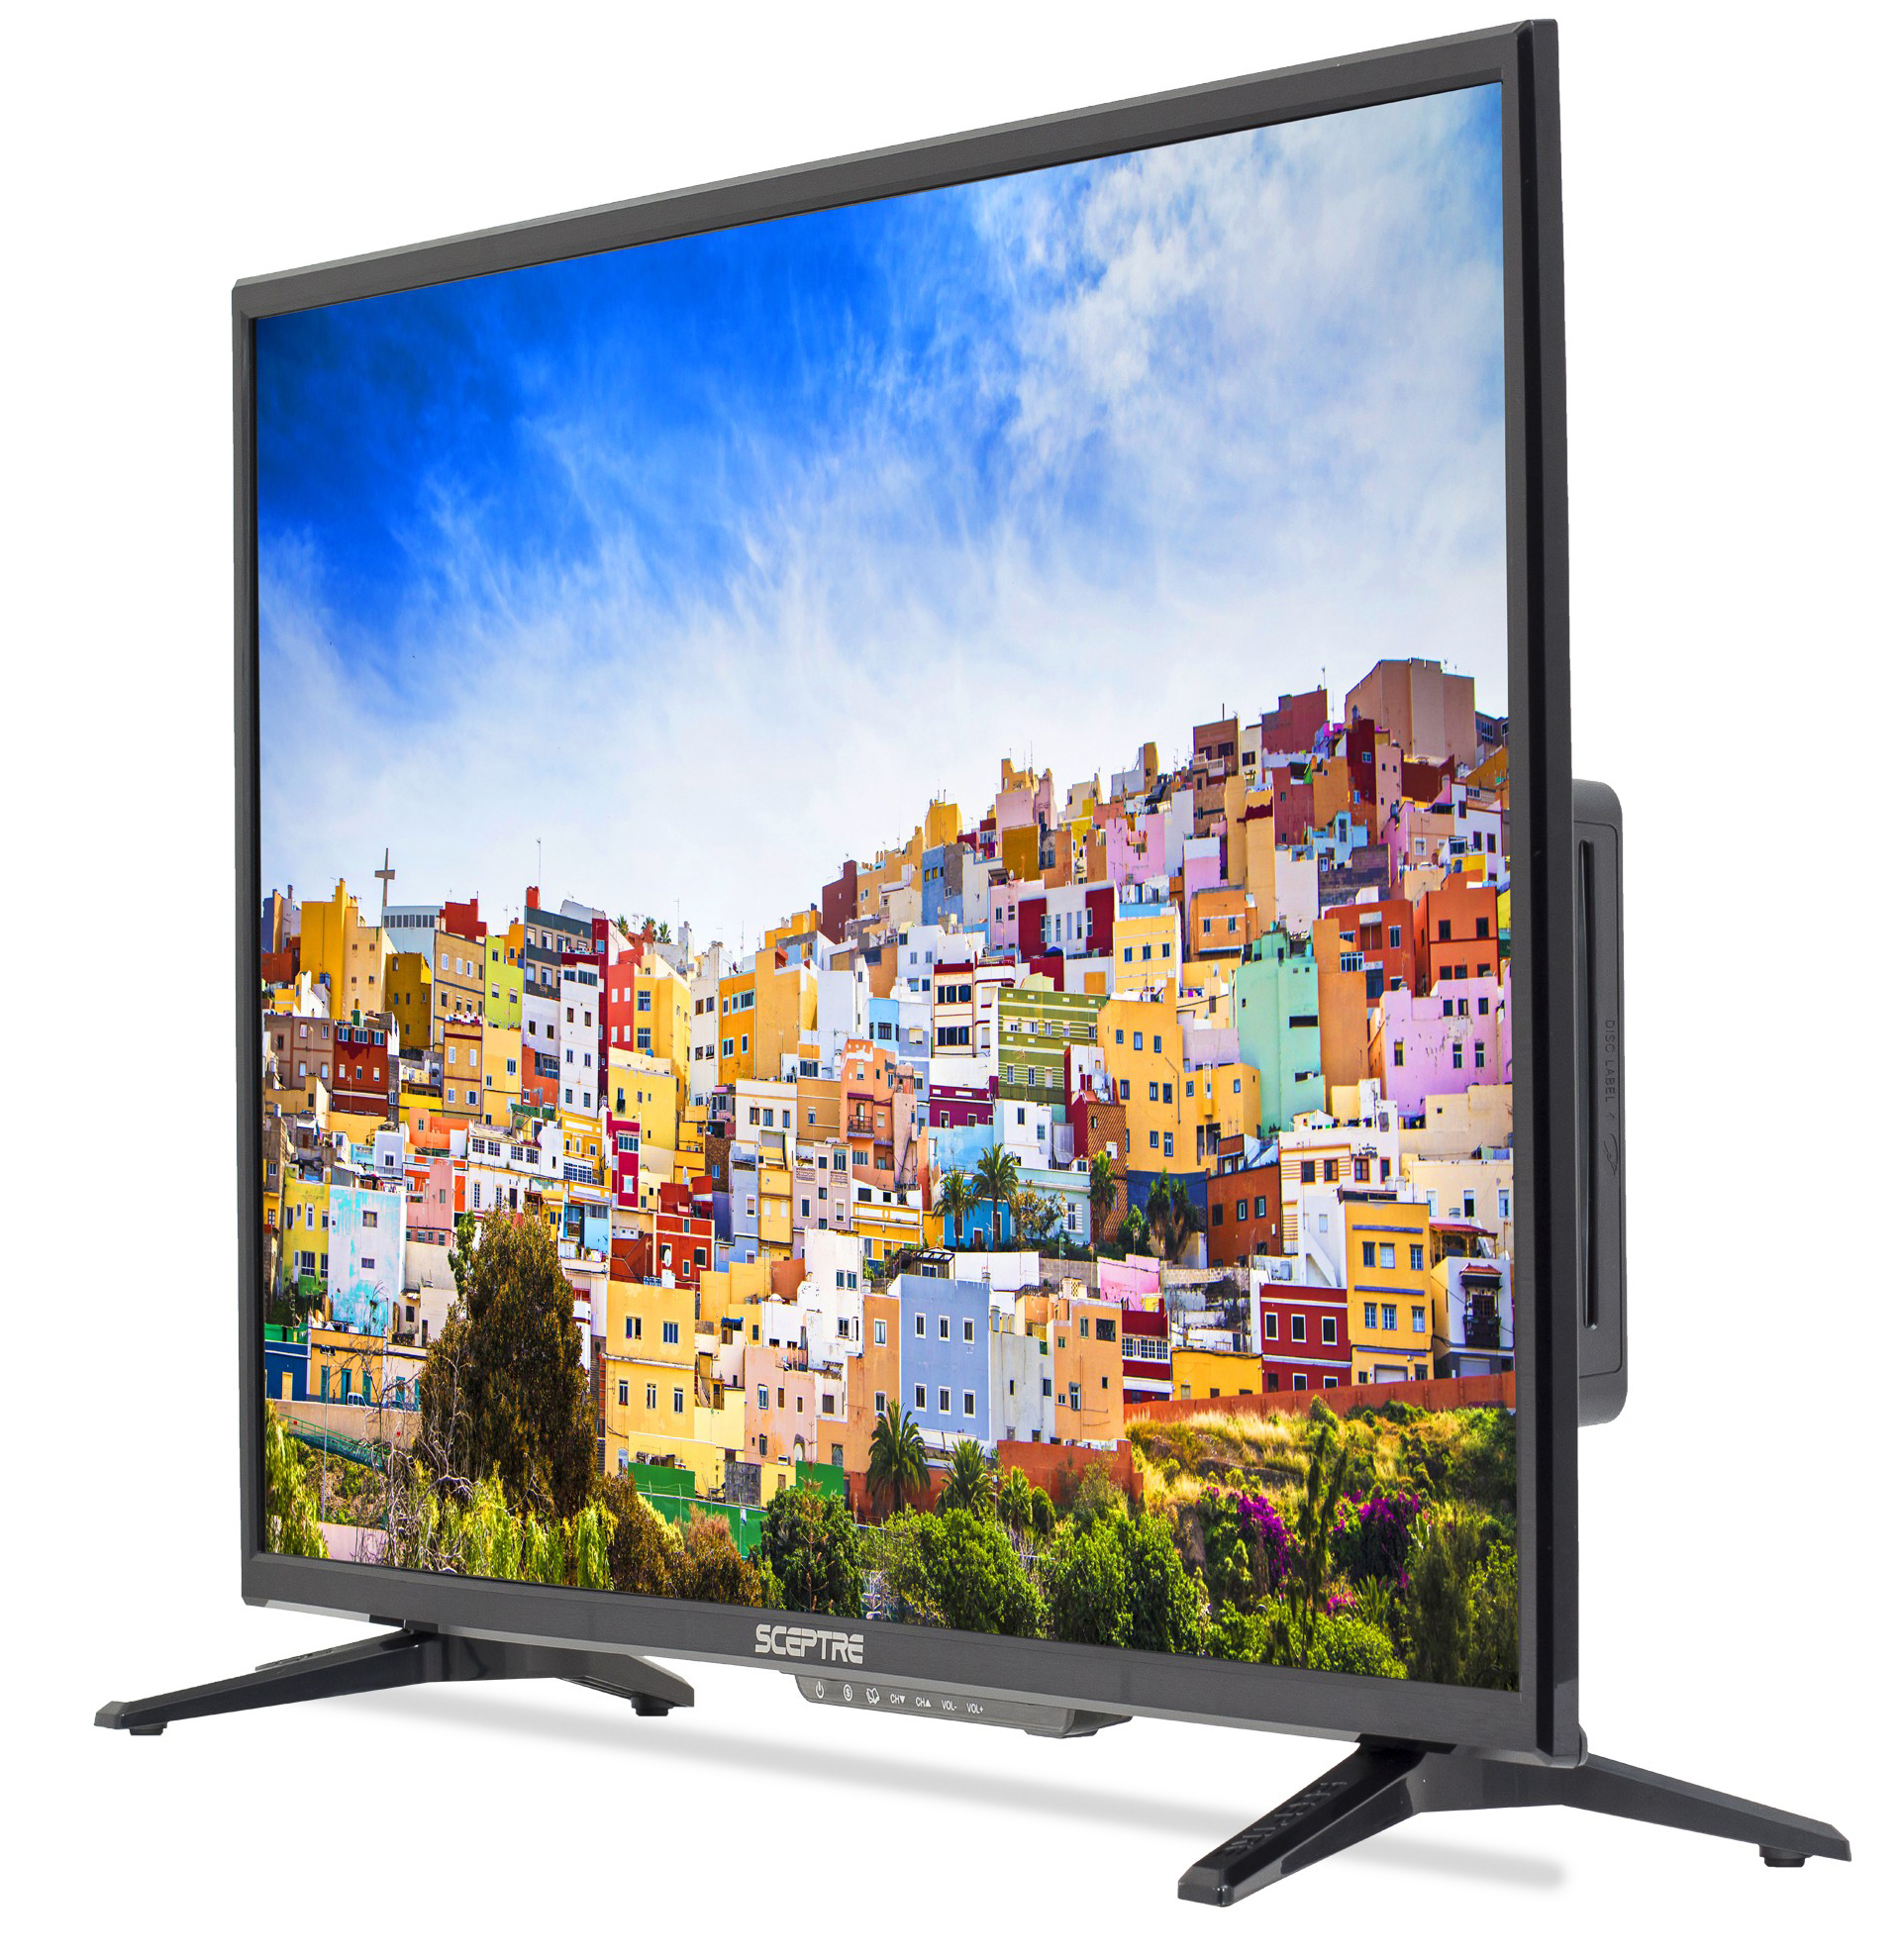 Sceptre 32" Class HD (720P) LED TV (E325BD-S) with Built-in DVD - image 4 of 7